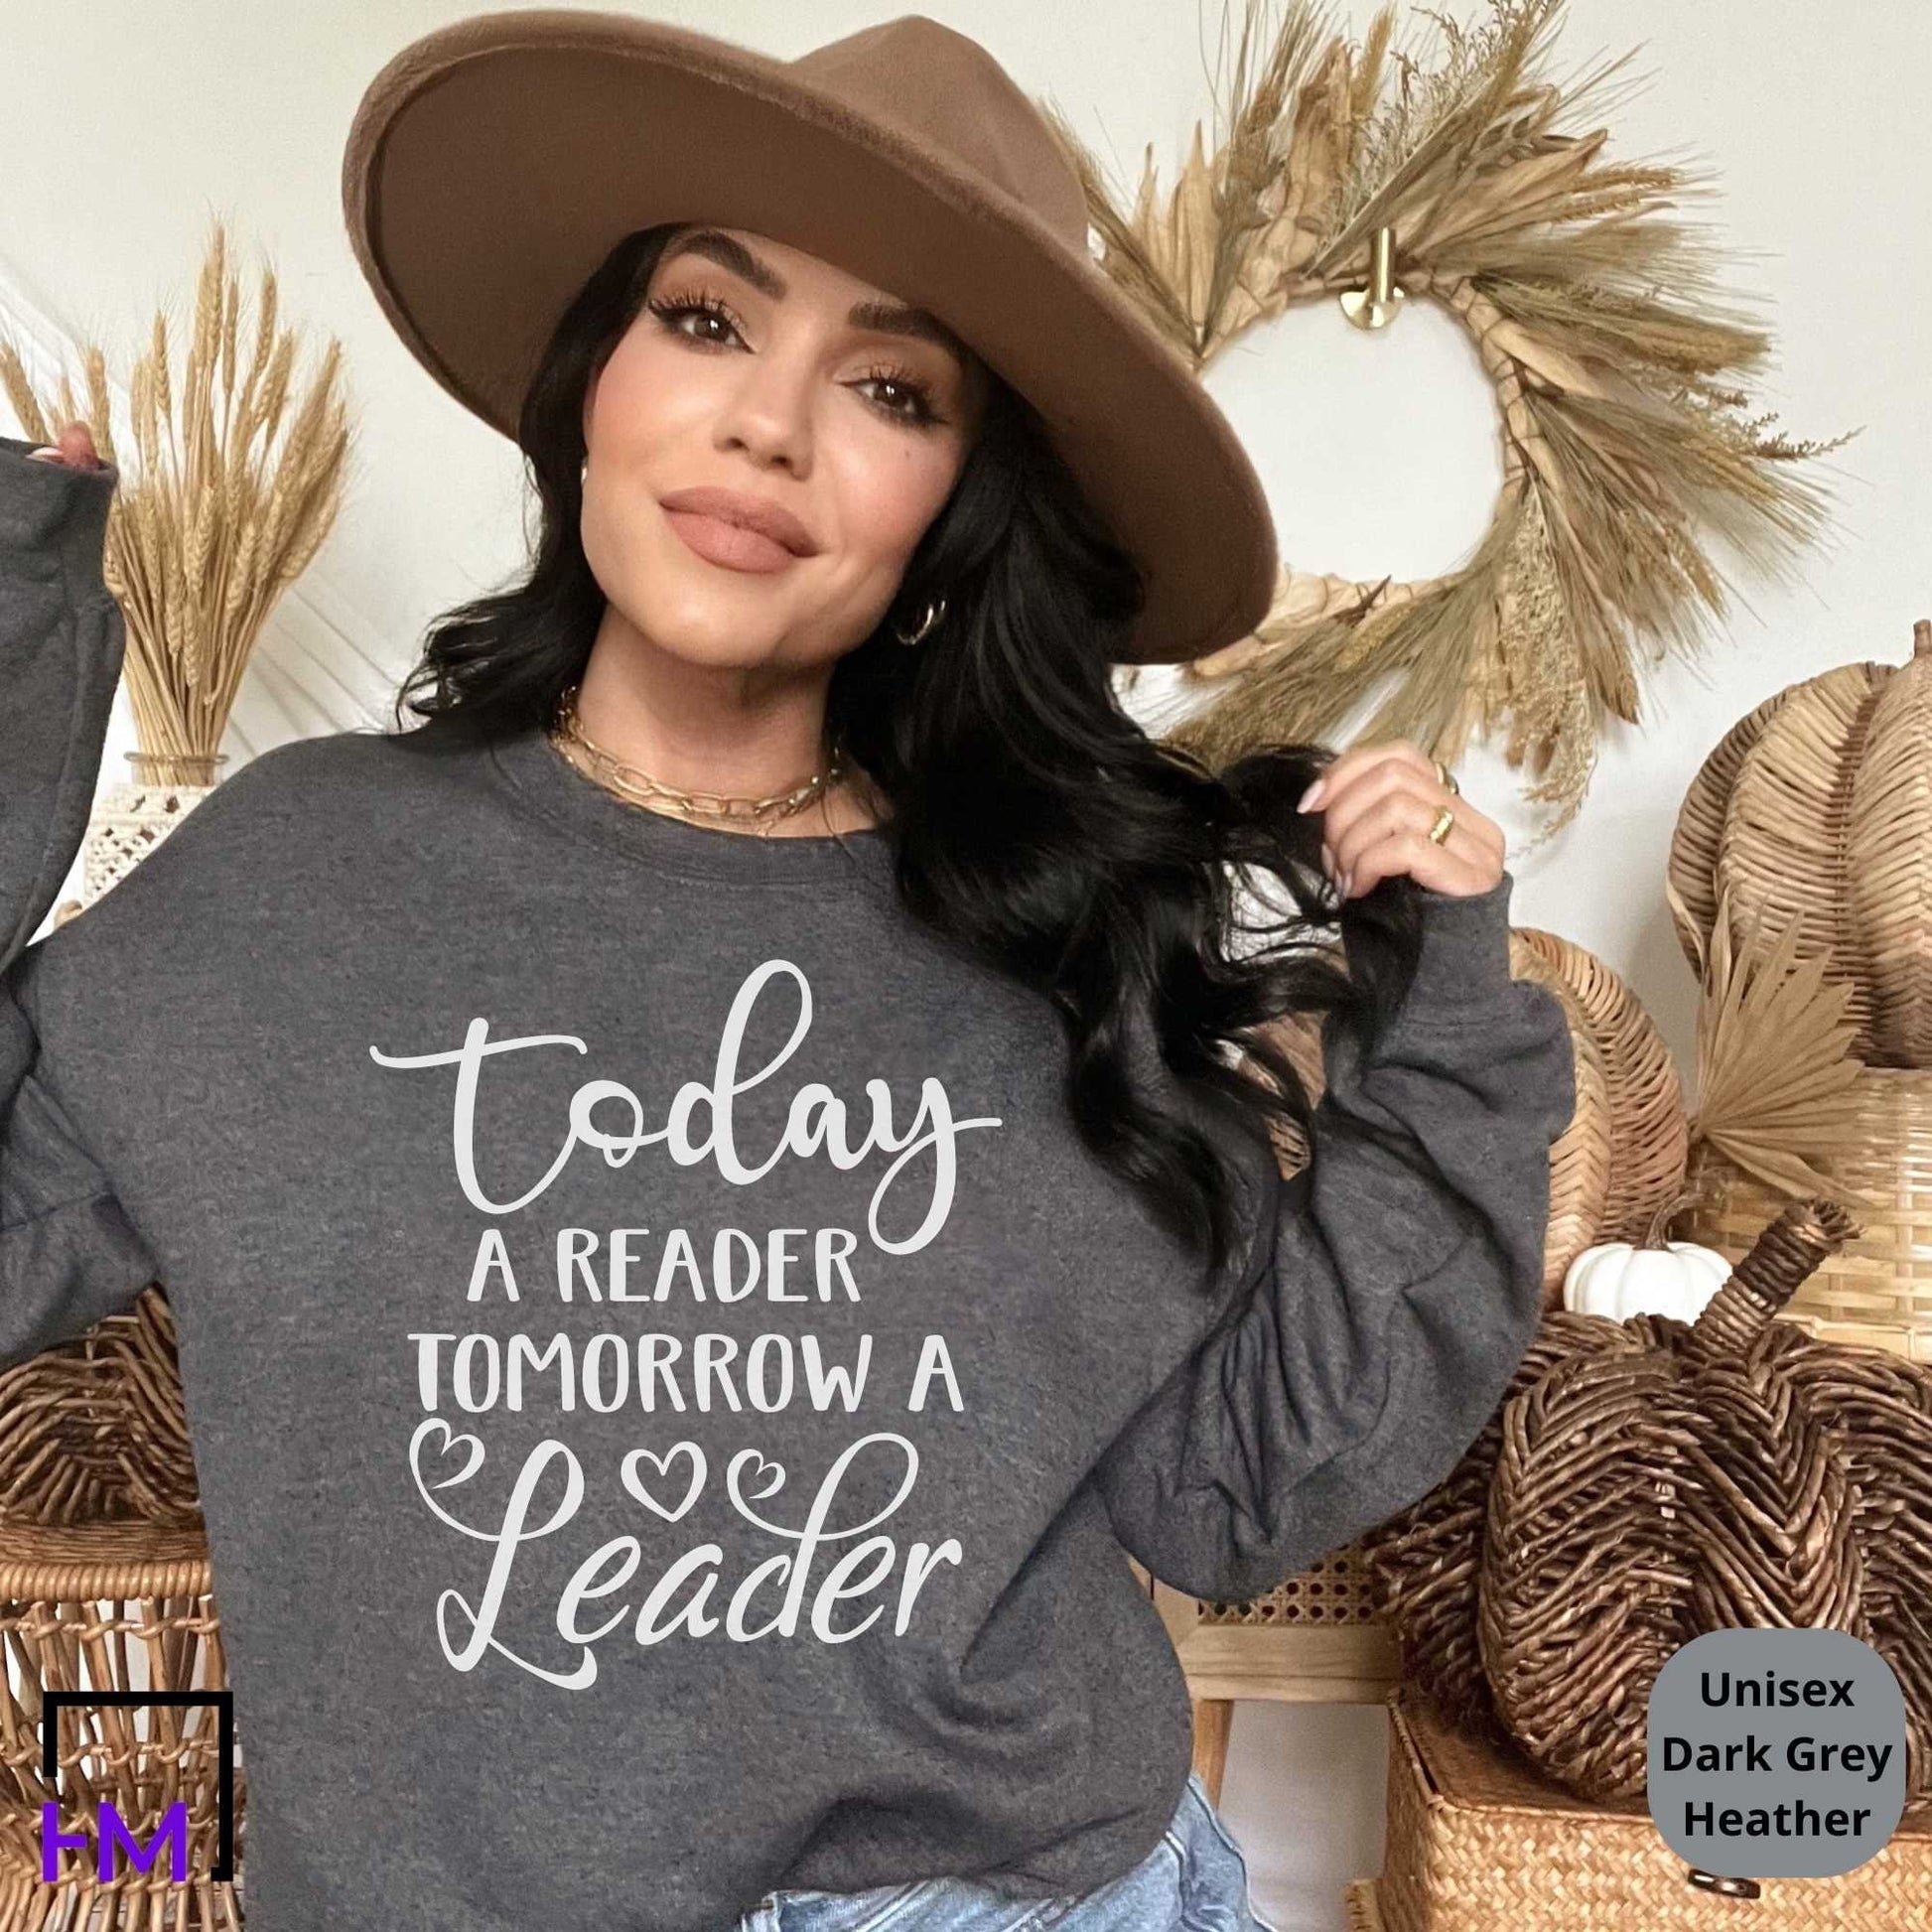 Book Lover Shirt | Reader Gift for Leaders, Bookworms, English Teachers, Librarian, Writer, Bookclubs, Nerds, Bosses | Appreciation Gift